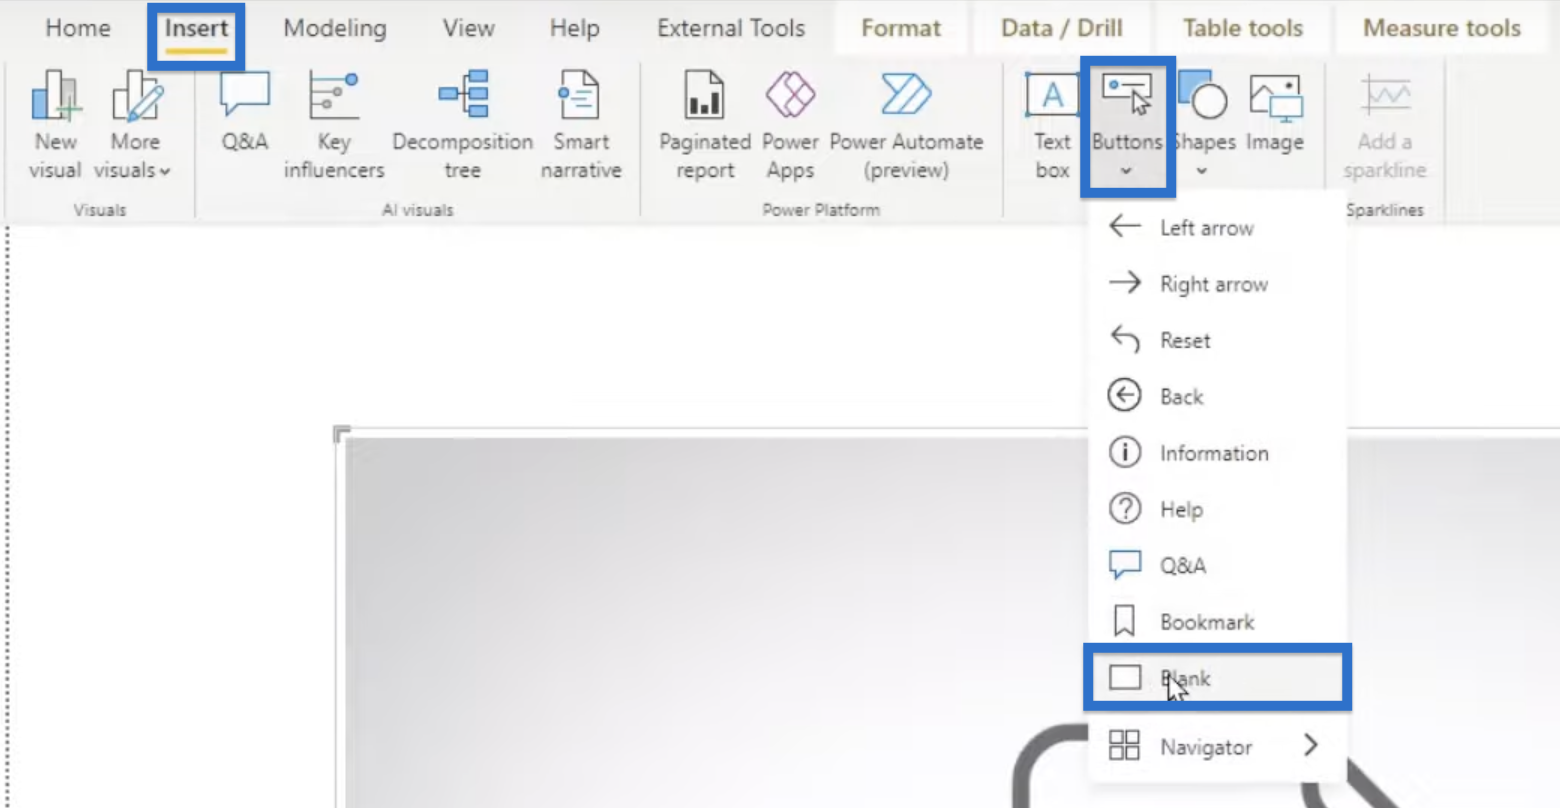 Method 1: Creating Buttons for Power BI Videos